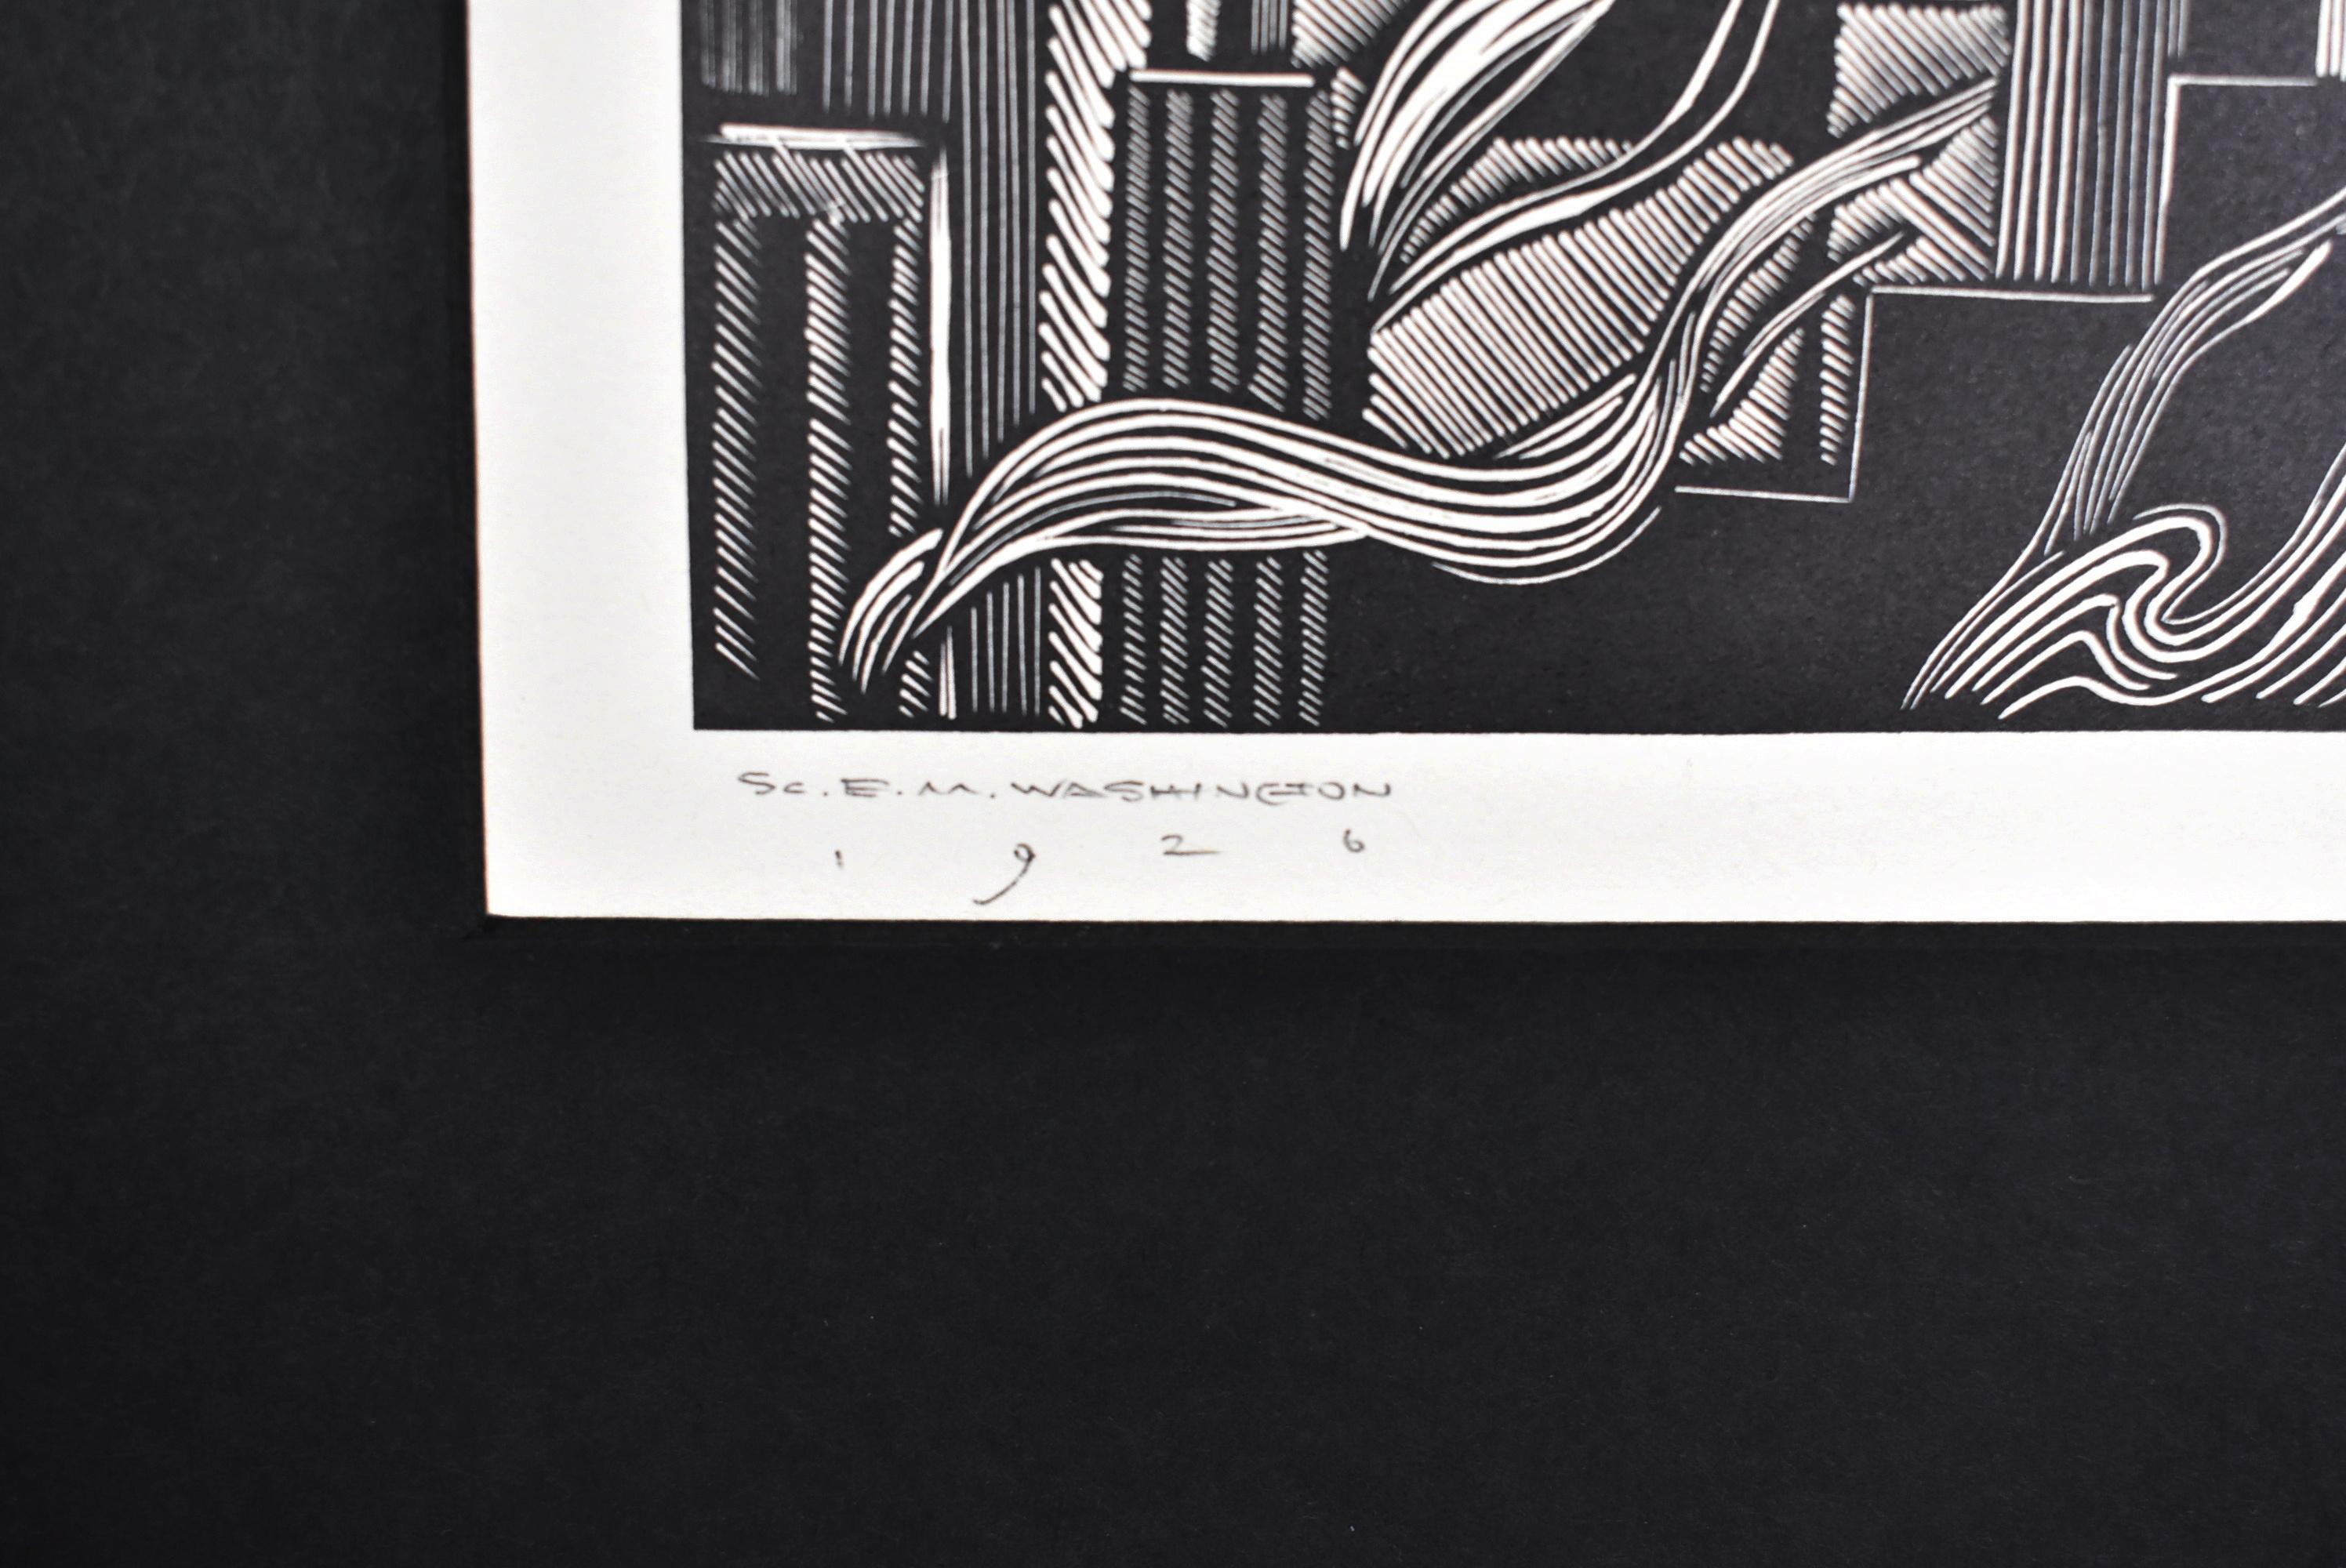 E.M. Washington wood block print circa 1926 depicting industry / factories. Signed and dated in pencil. Very nice condition. Image size is 5